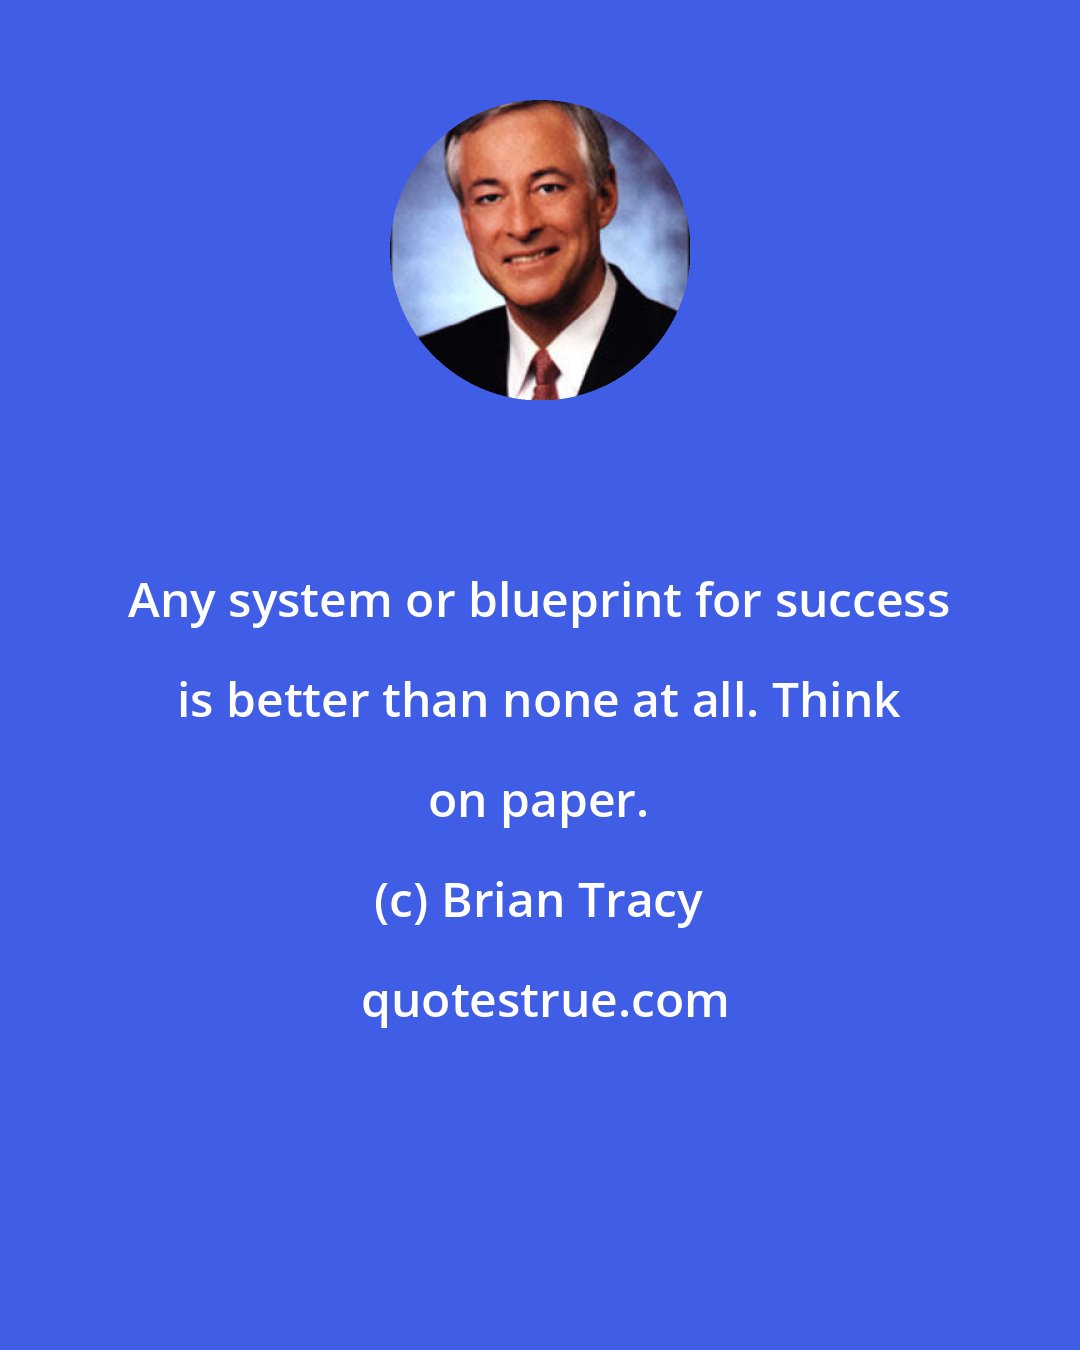 Brian Tracy: Any system or blueprint for success is better than none at all. Think on paper.